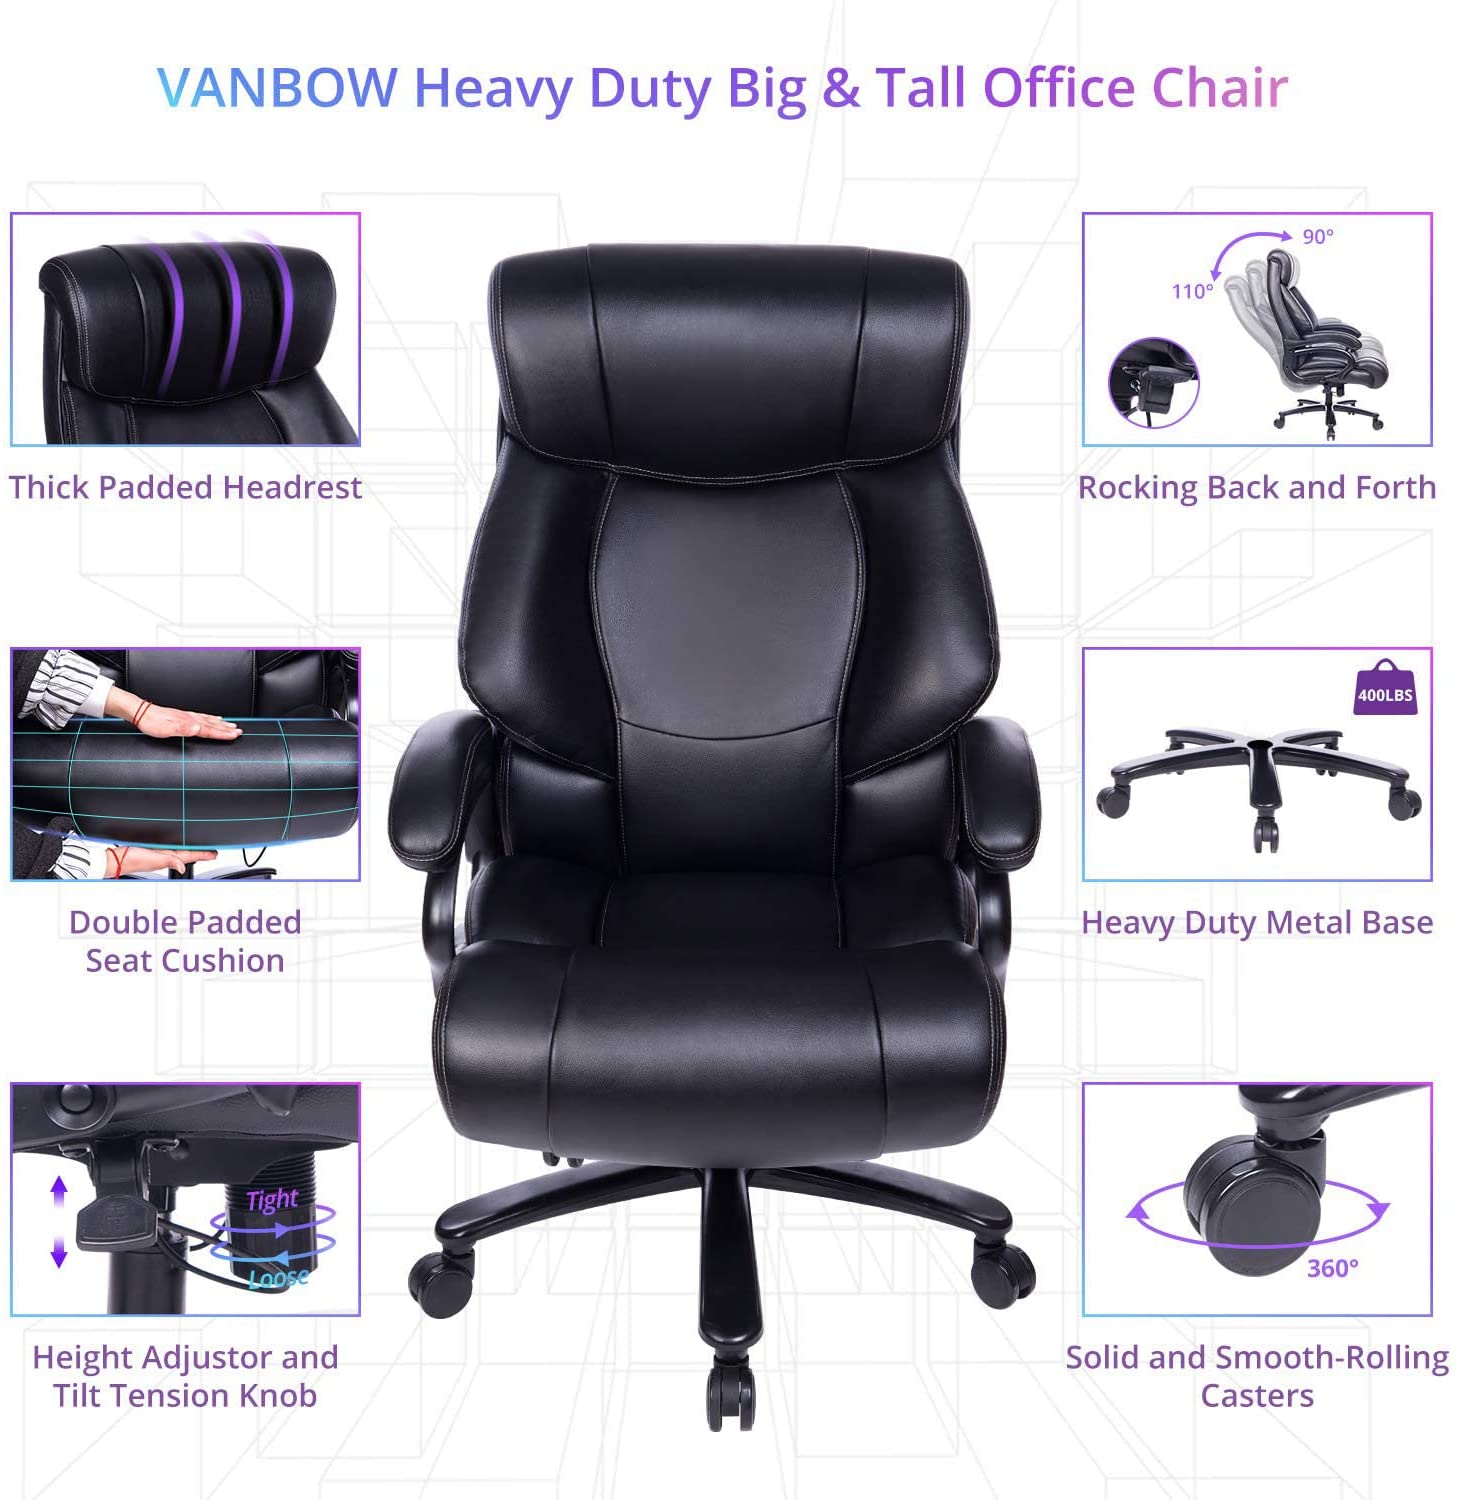 Reficcer High Back Big & Tall 400lb Leather Gaming / Work Chair for Your Office Space.(Black)(NC)